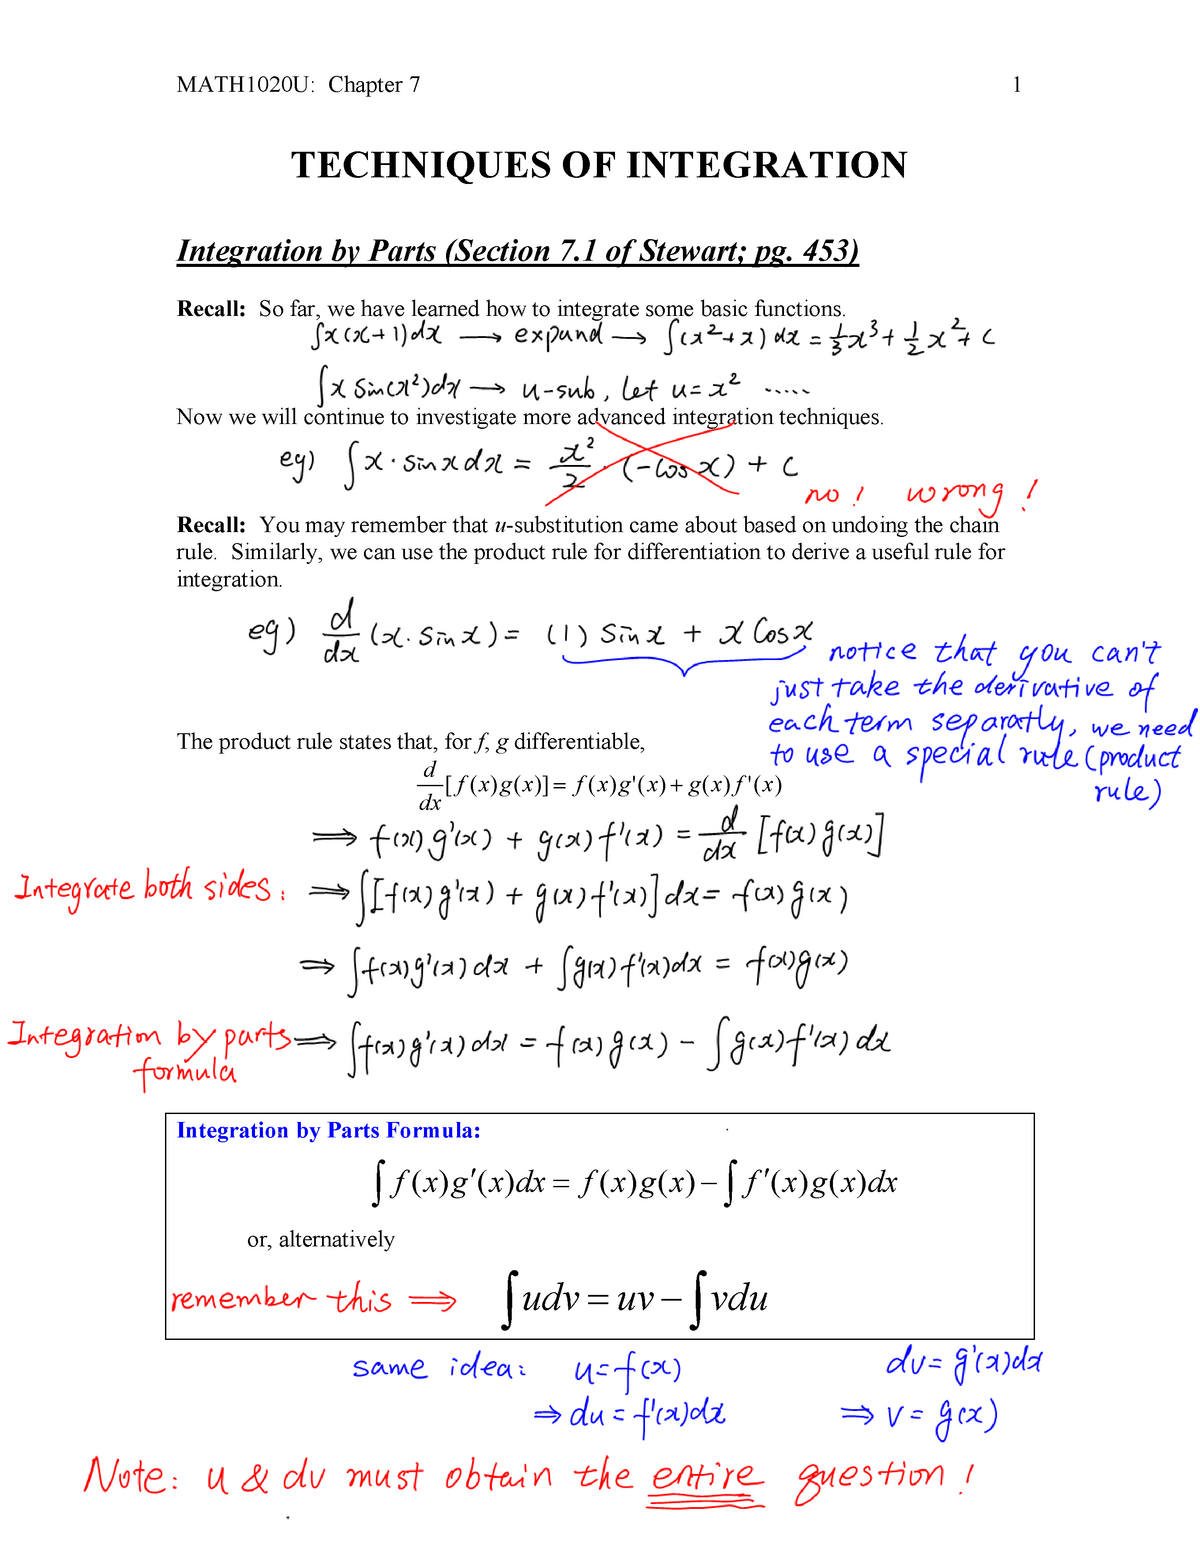 May4 Intparts 7 Integration By Parts Notes Studocu